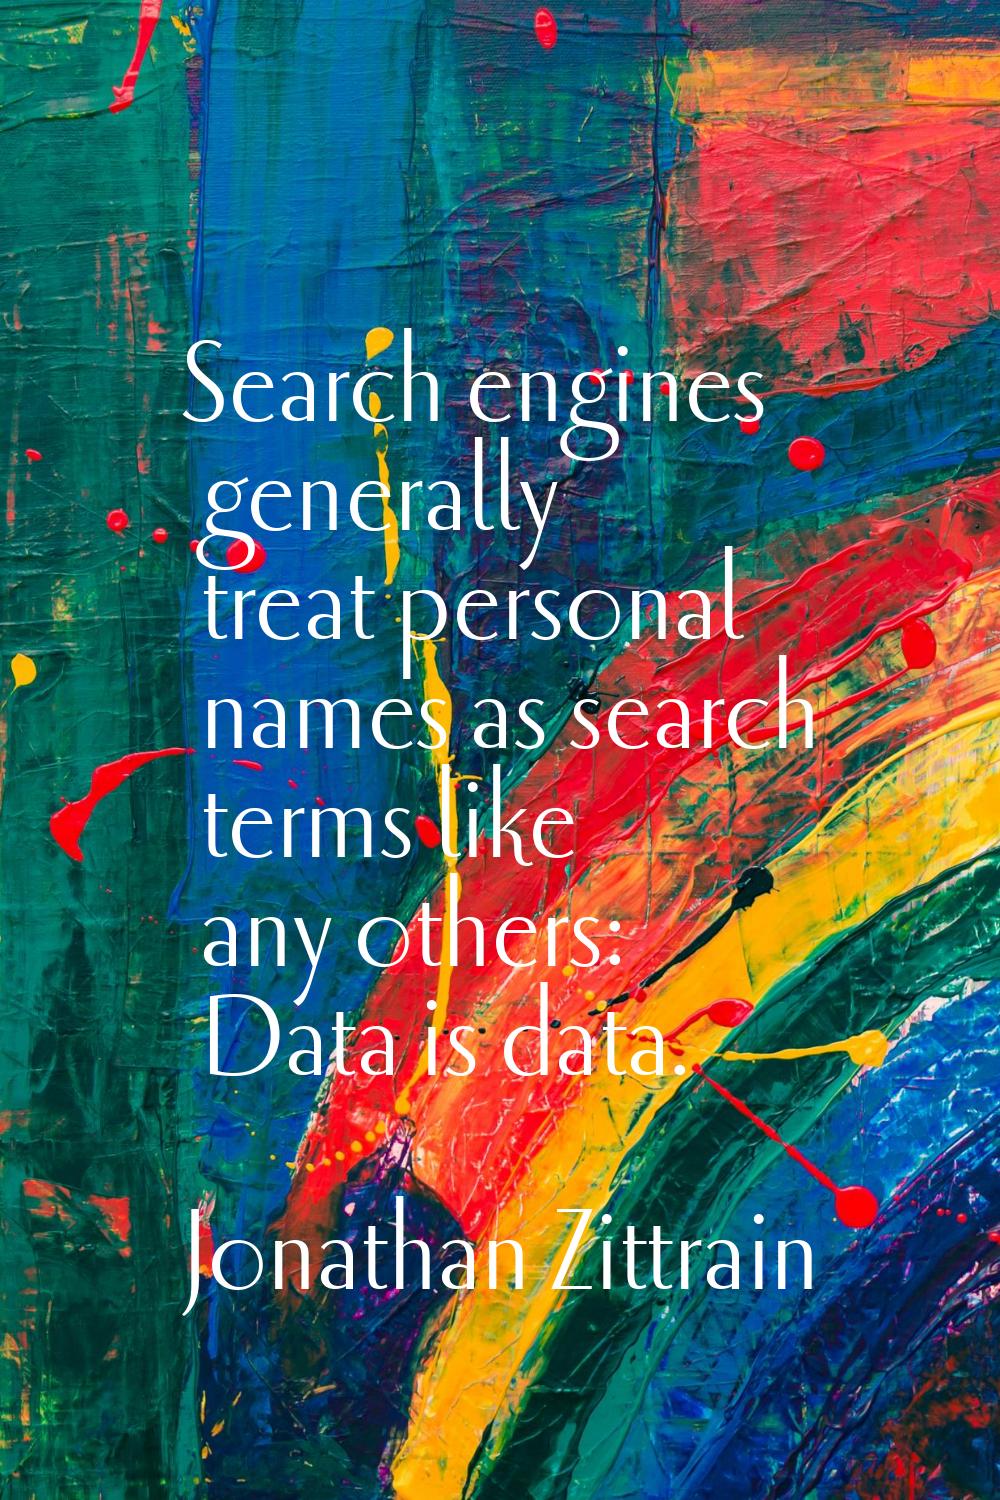 Search engines generally treat personal names as search terms like any others: Data is data.